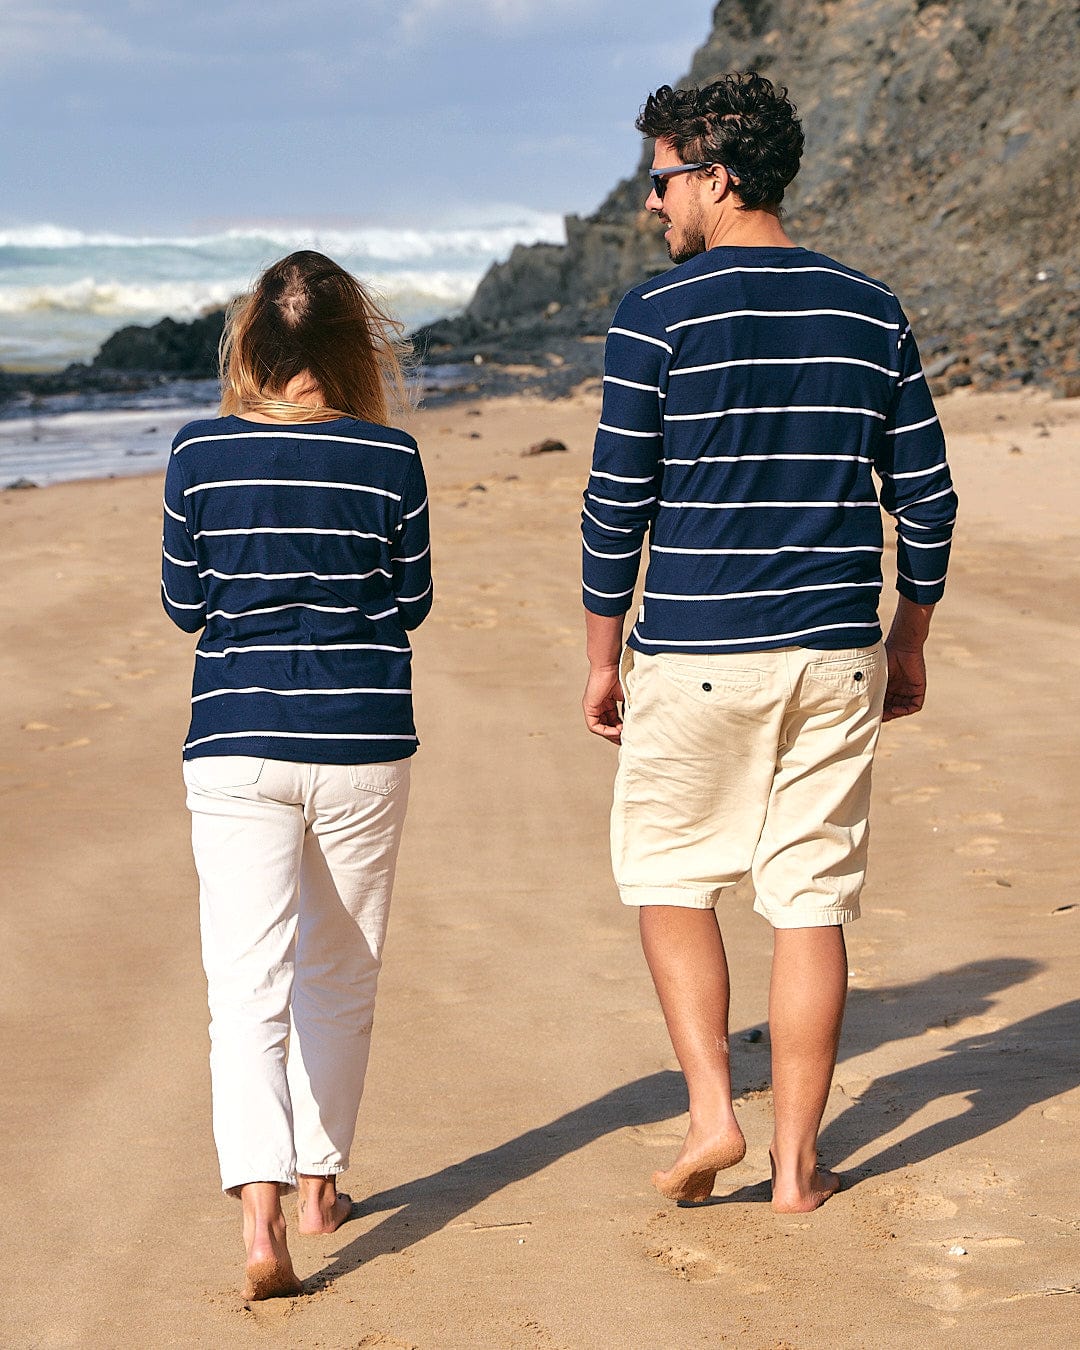 A man and a woman wearing matching Saltrock Hartland Womens Striped Long Sleeve T-Shirts in Blue and beige pants walking on a sandy beach, facing away from the camera, both sporting a nautical look.